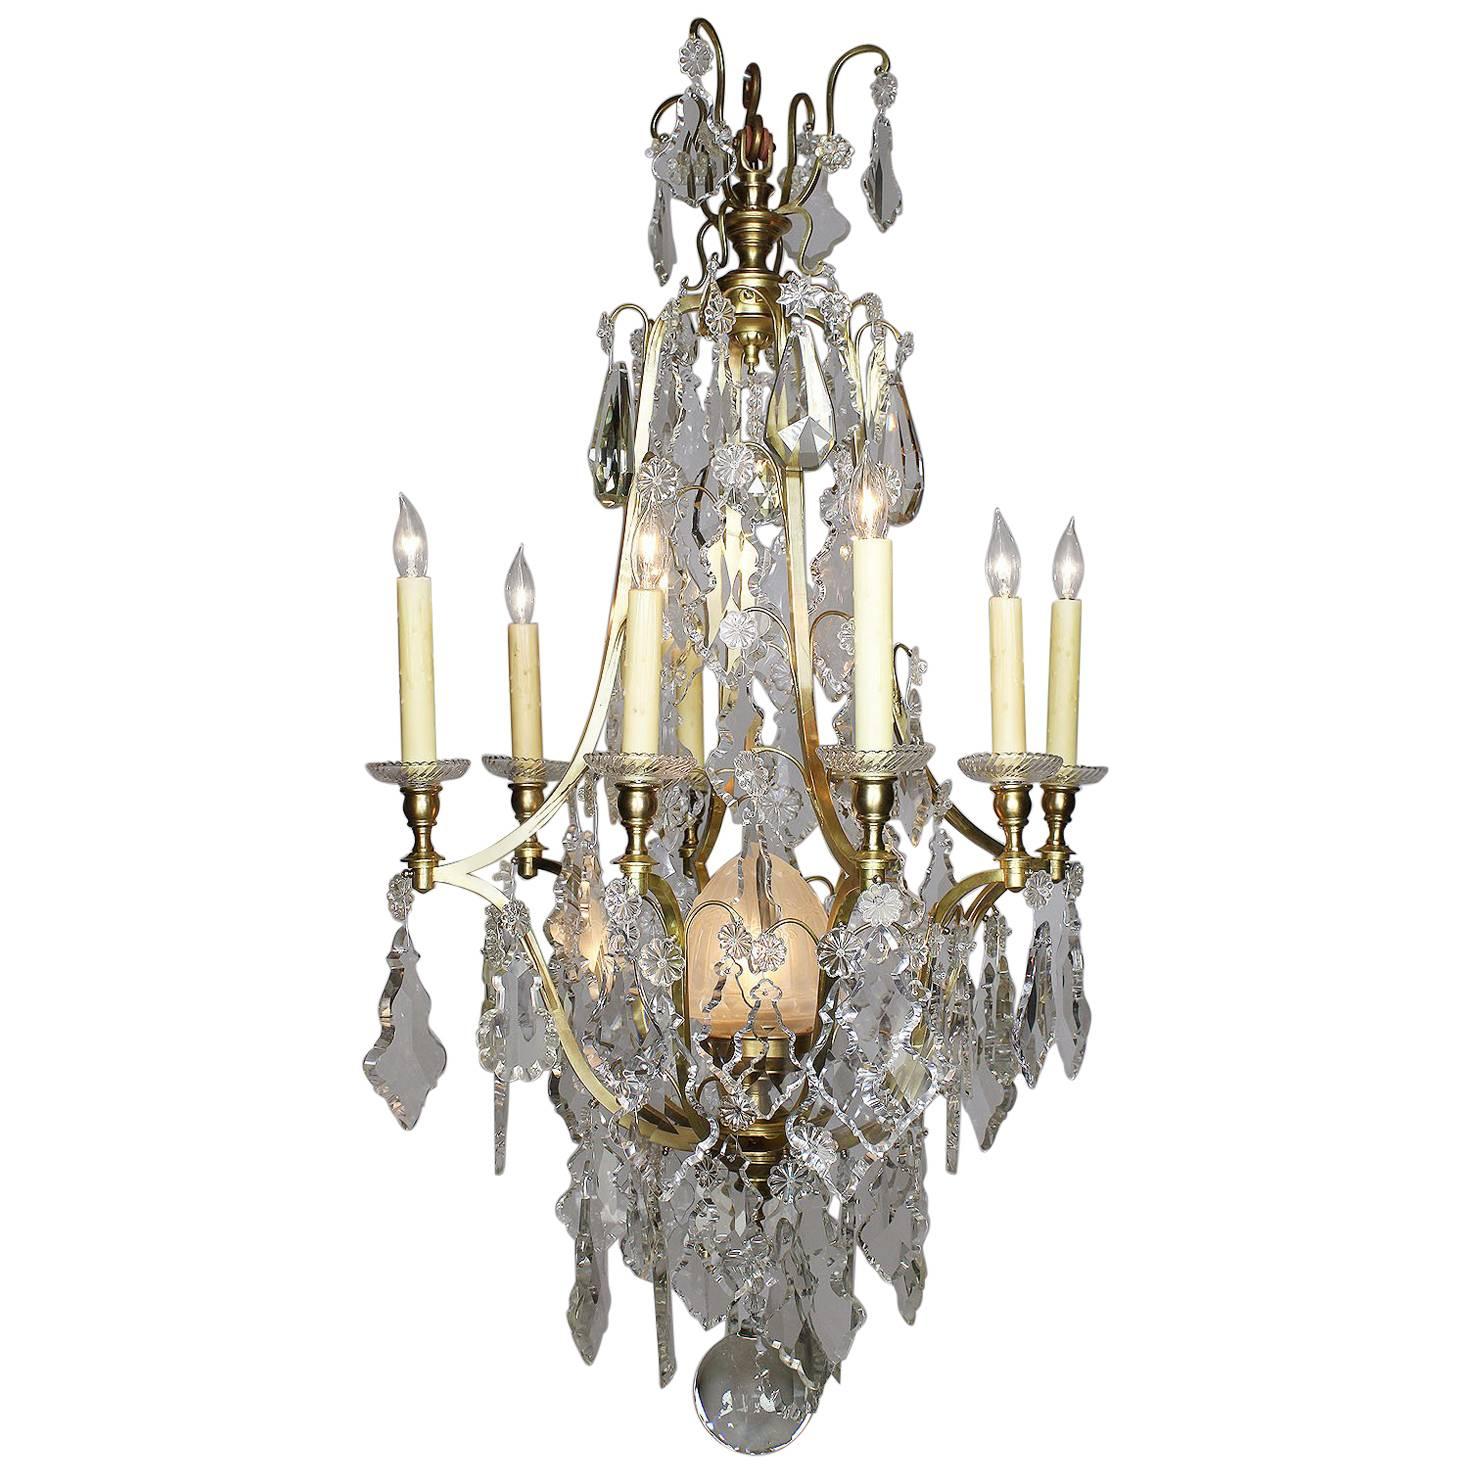 French Louis XV Style Gilt Bronze and Cut-Glass 'Crystal' Nine-Light Chandelier